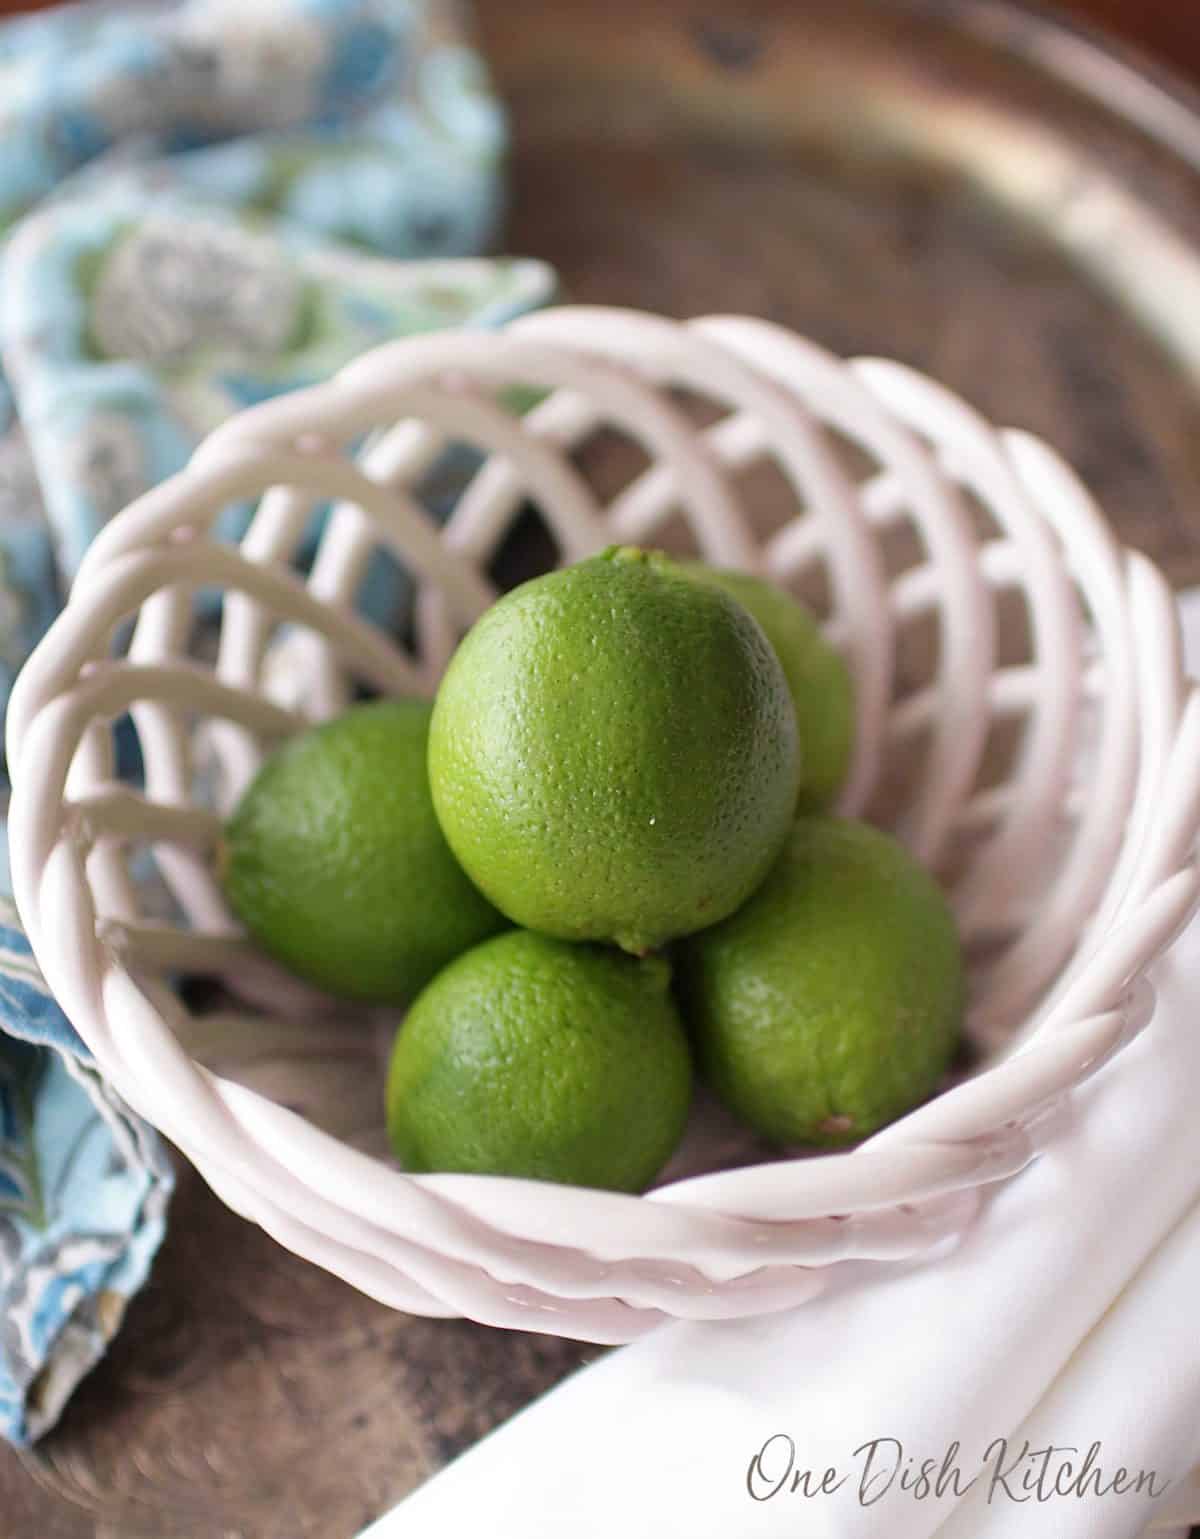 A bowl of five limes.